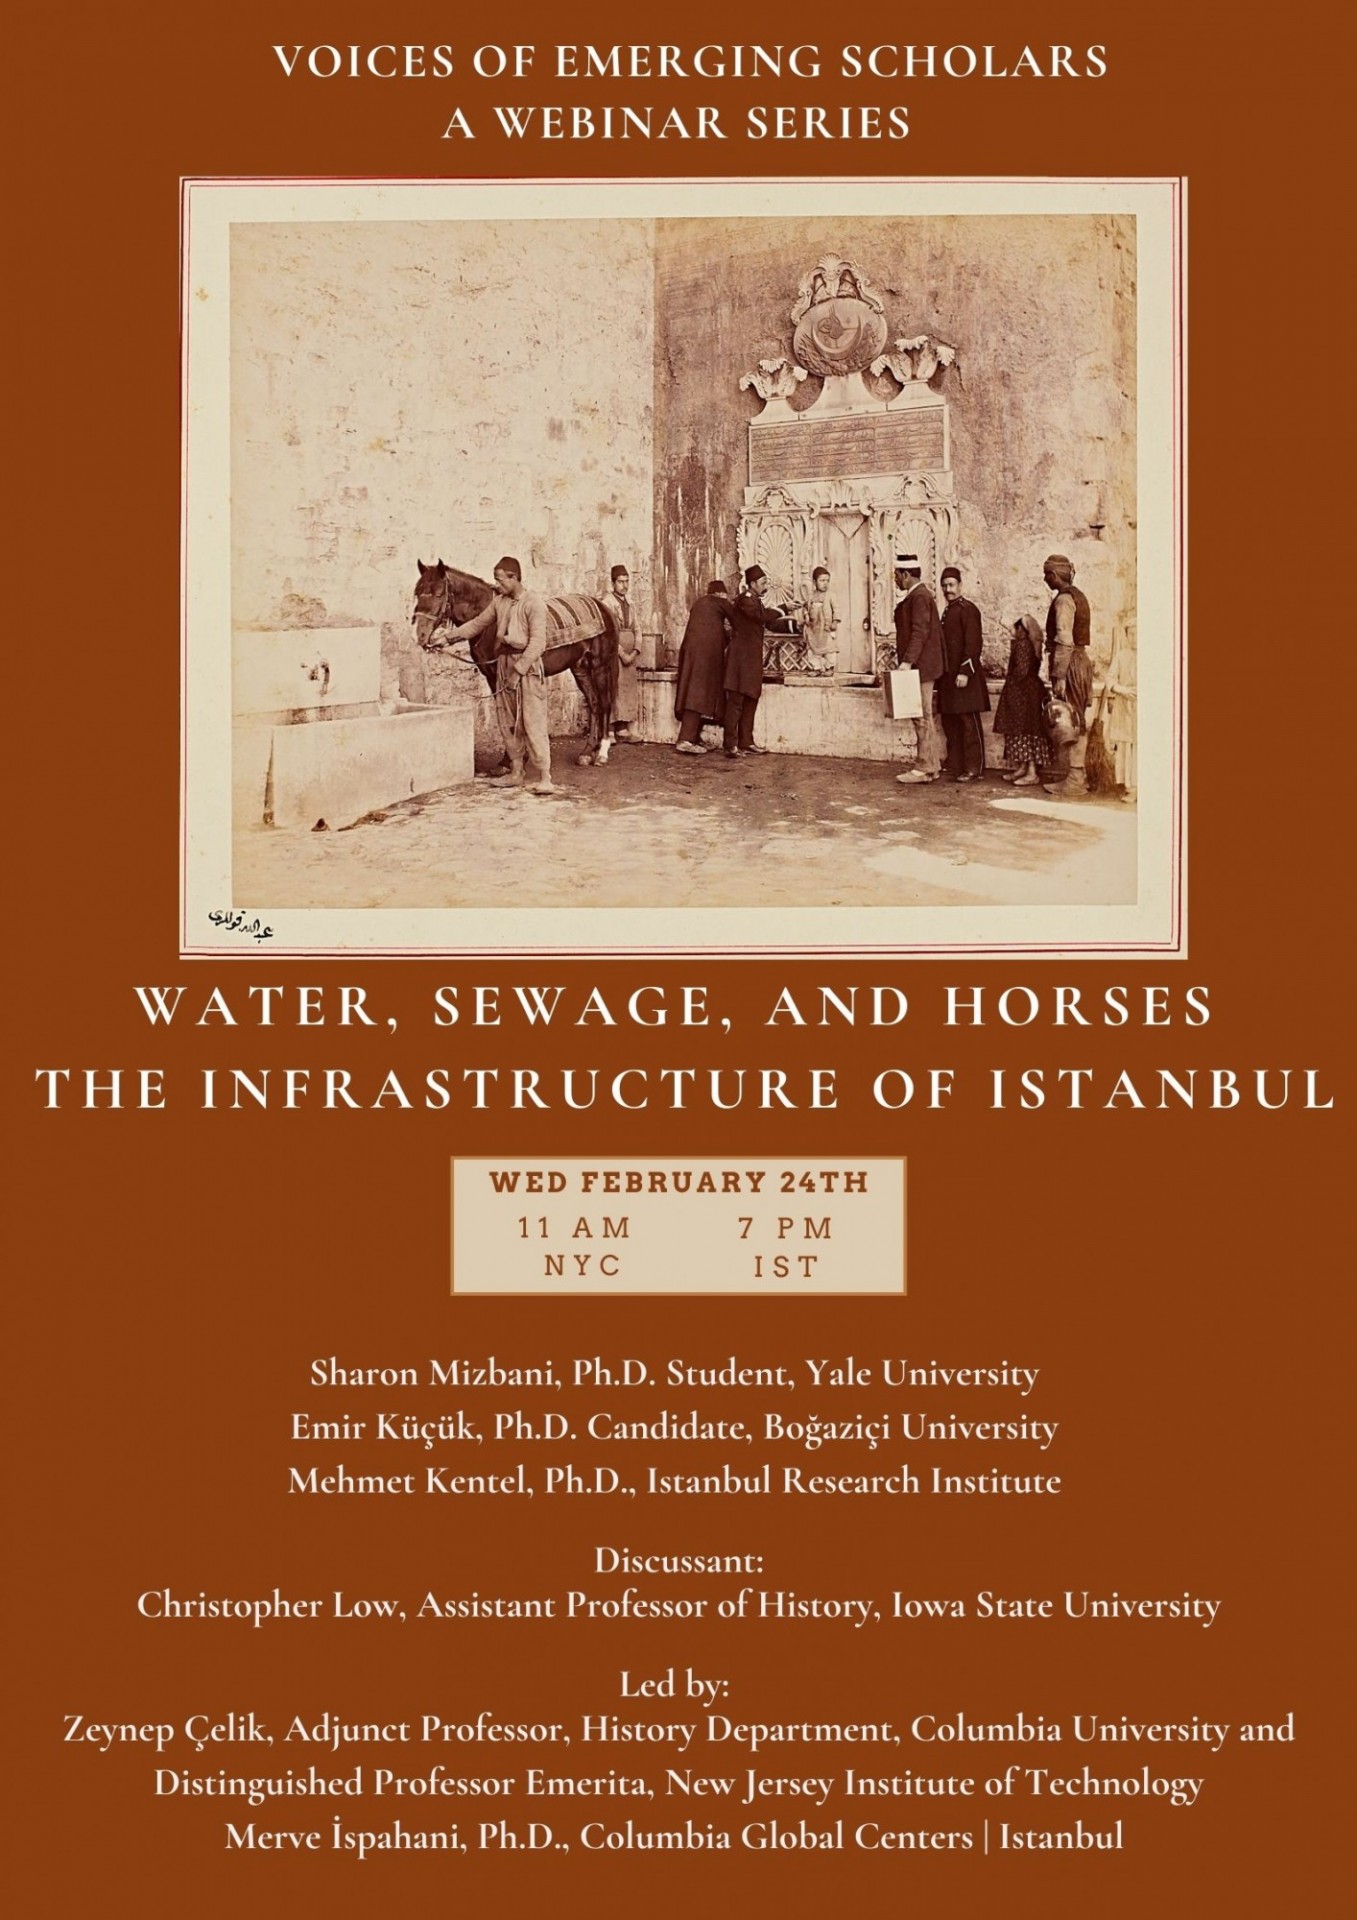 Water, Sewage, and Horses: The Infrastructure of Istanbul